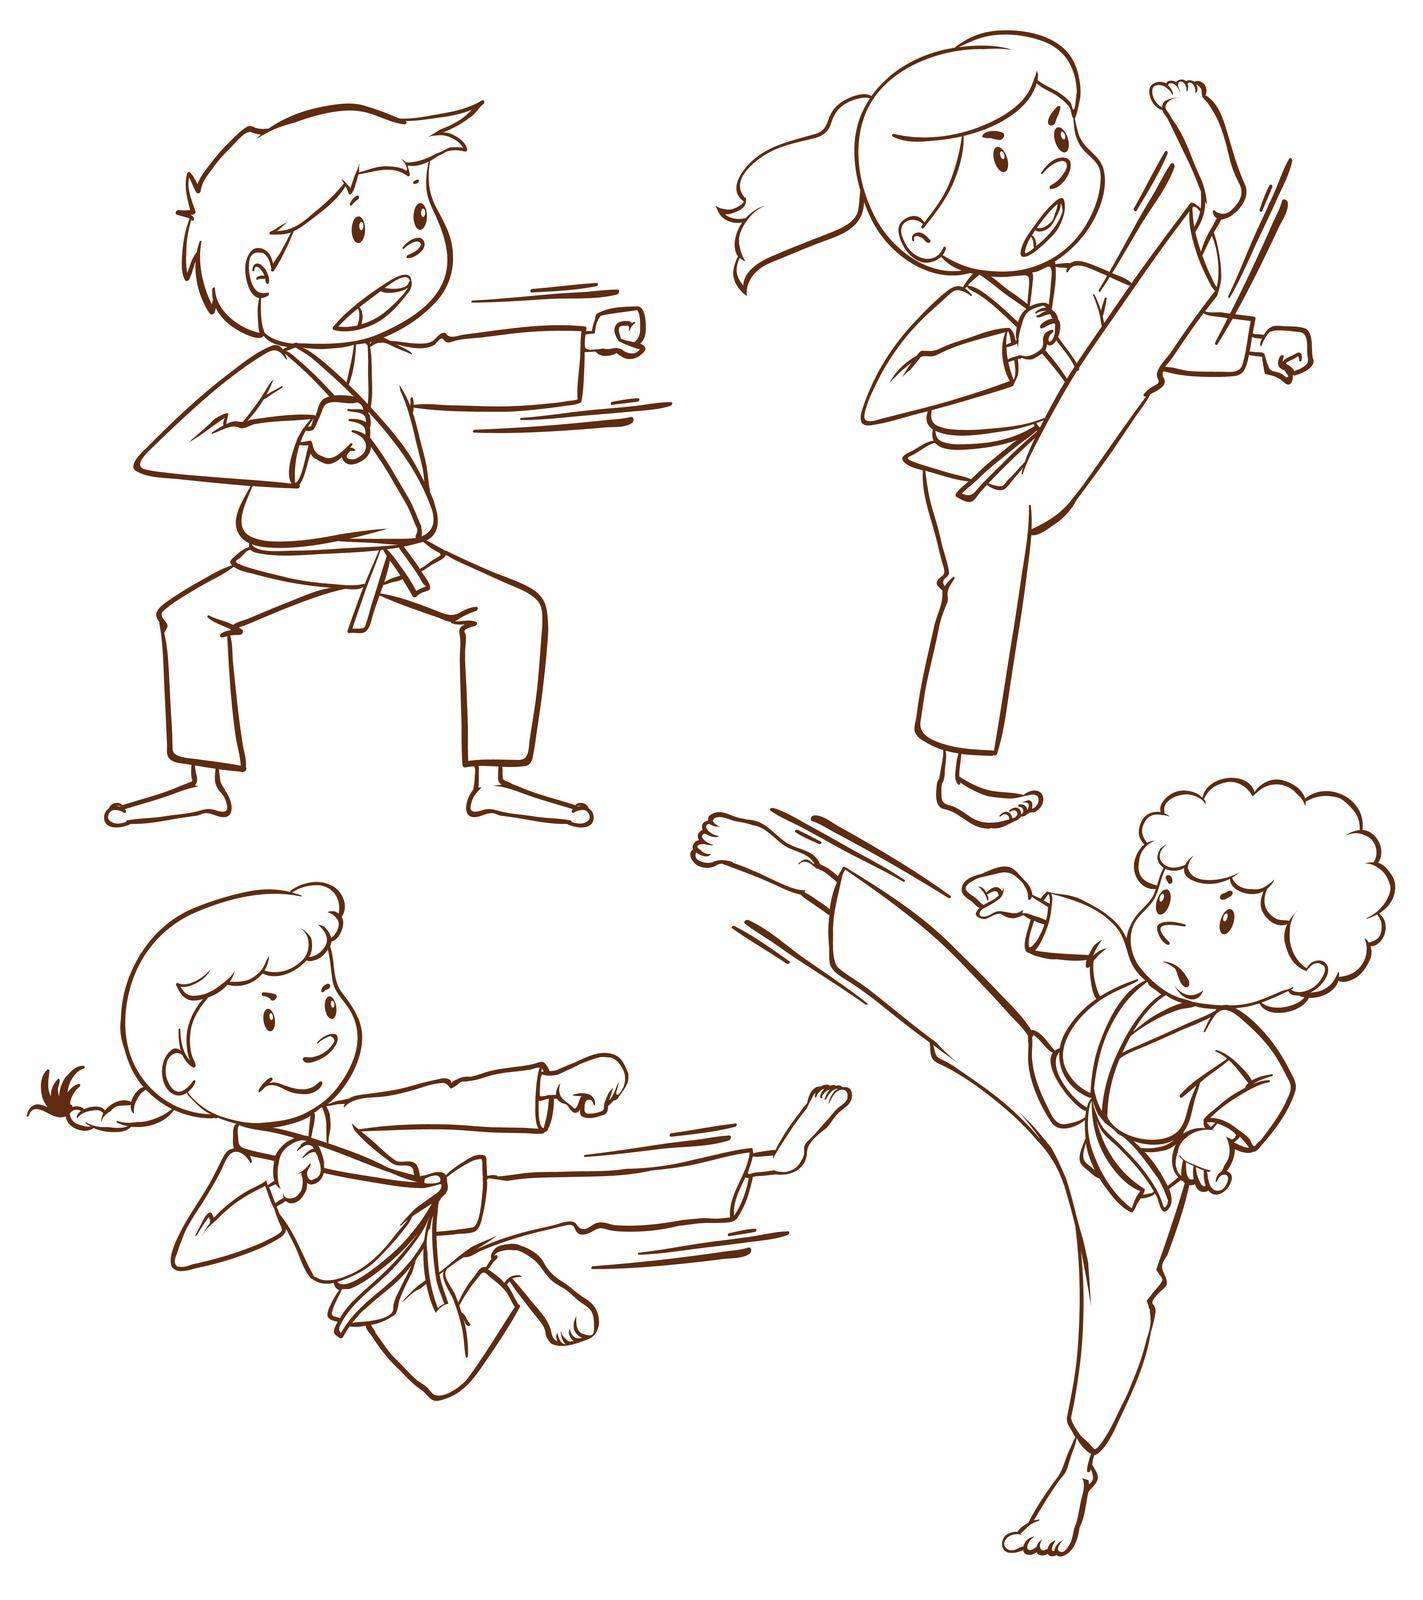 Illustration of the sketches of people doing martial arts on a white background